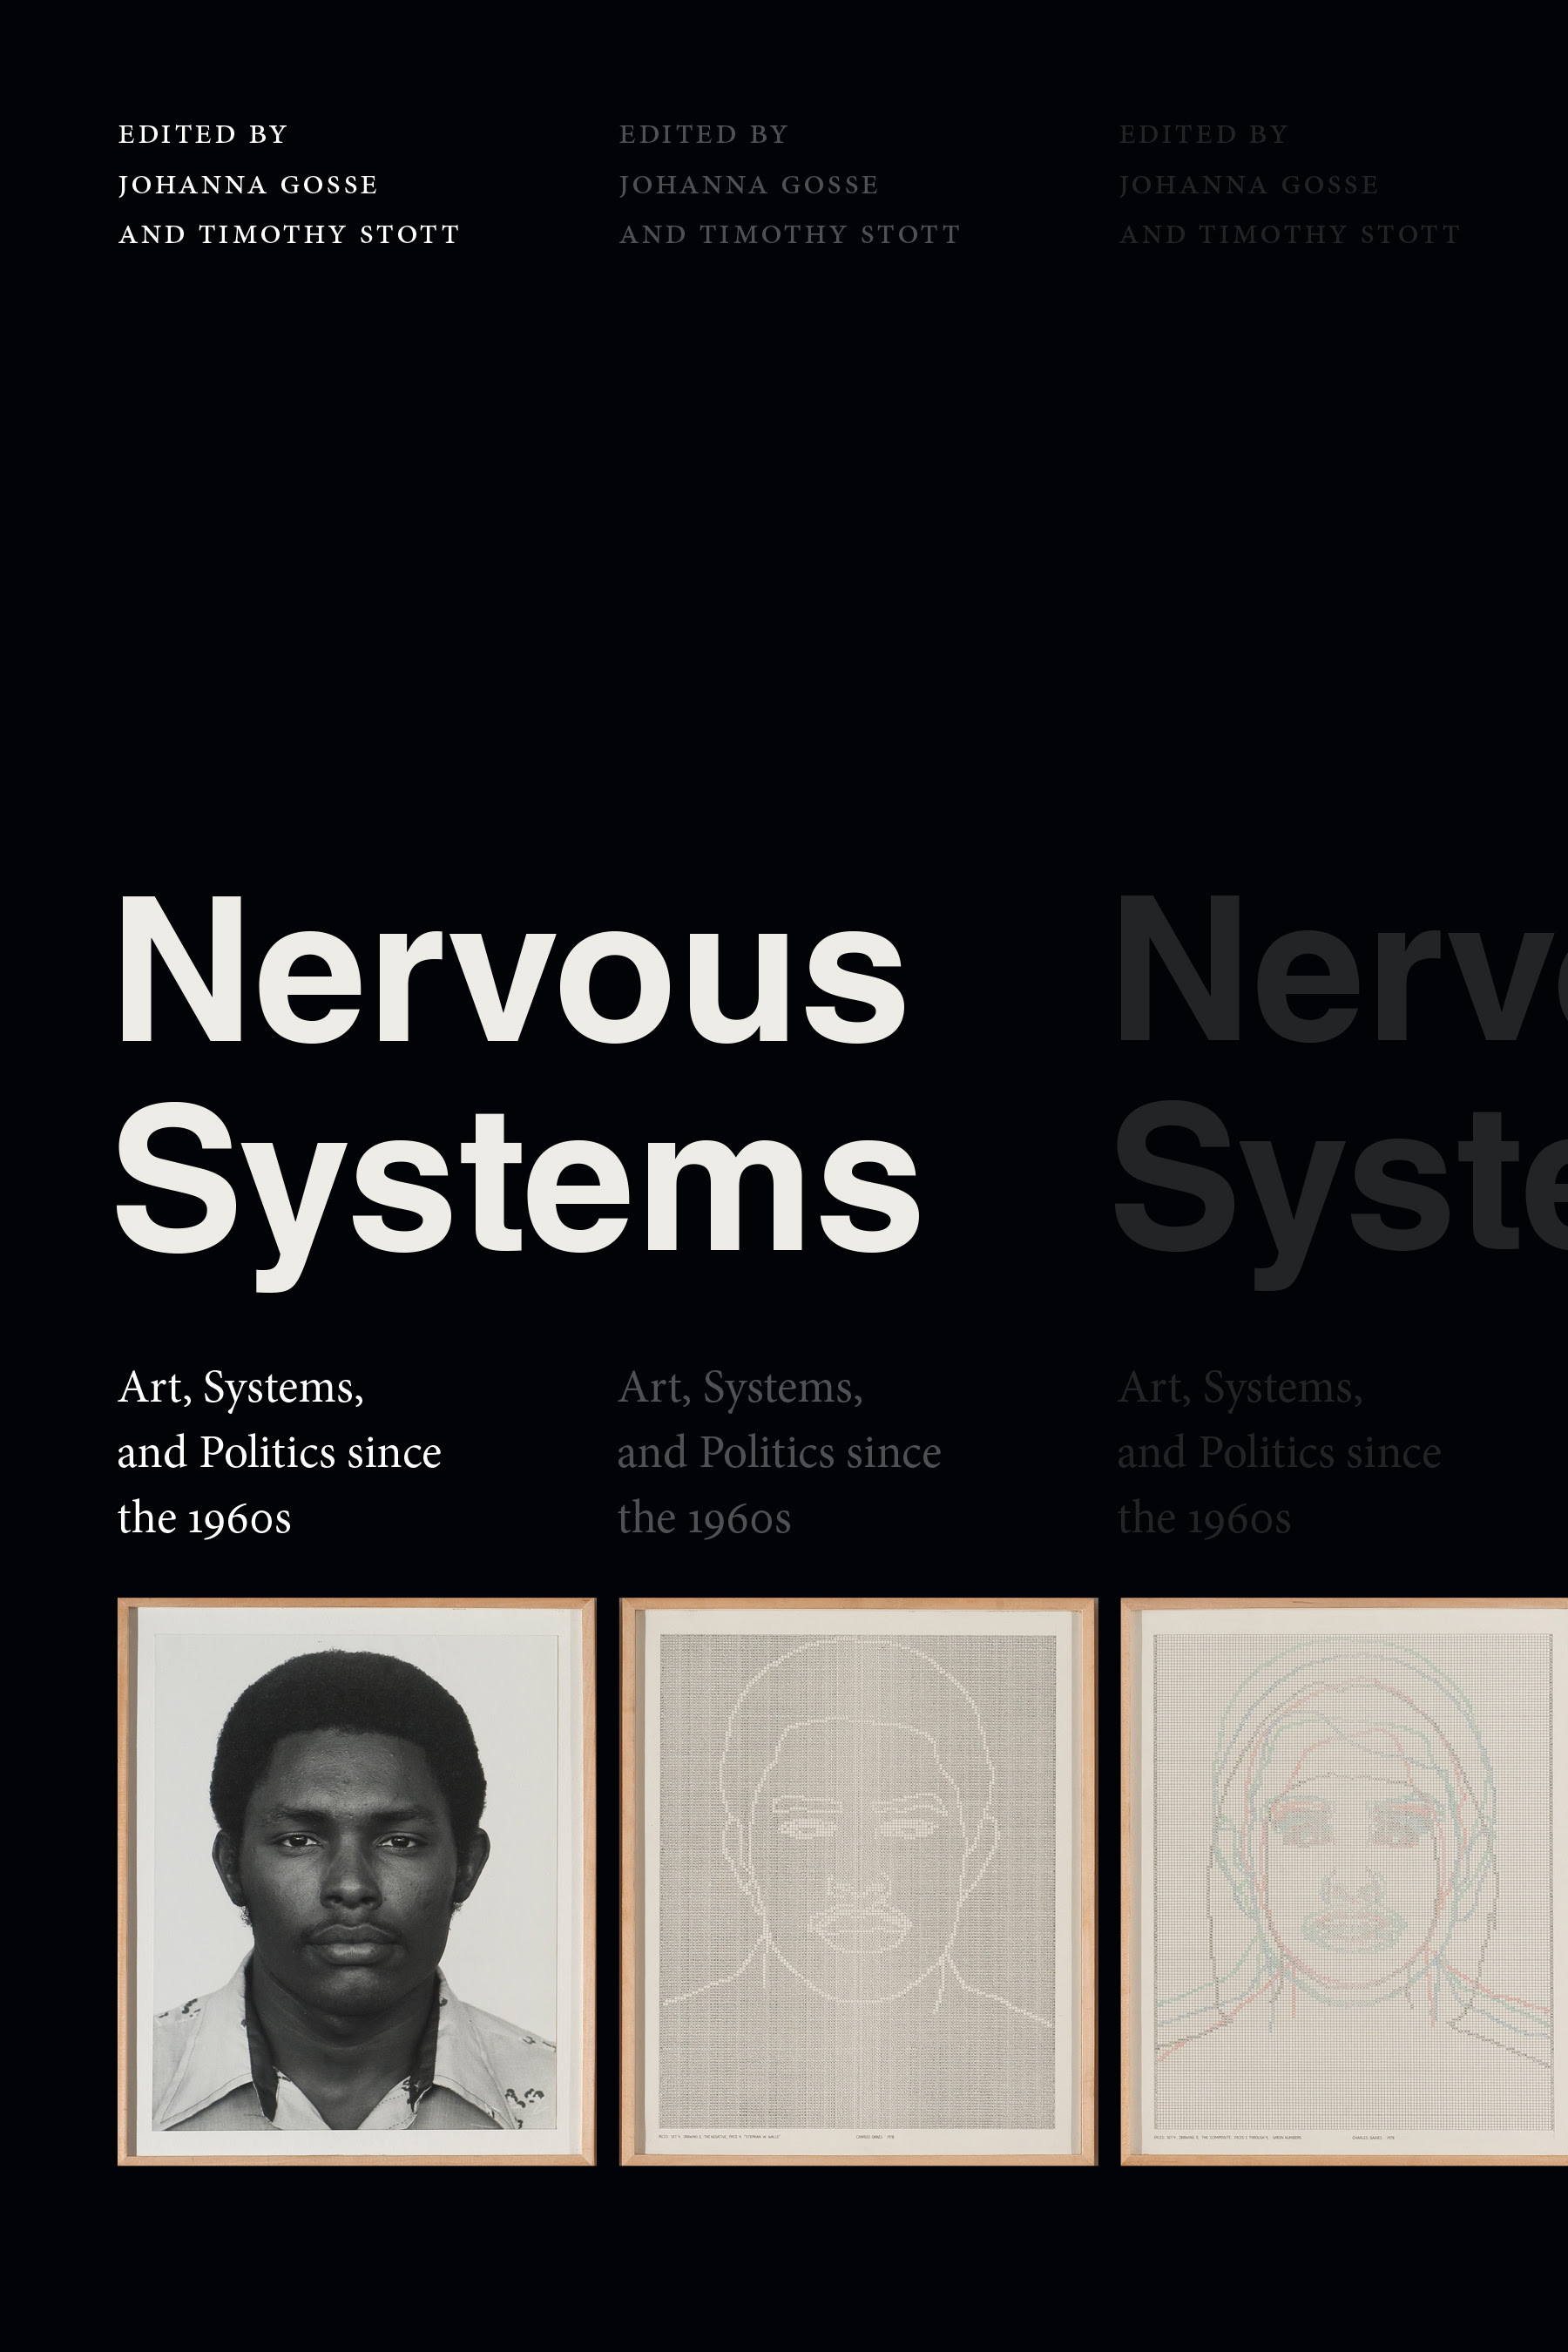 Nervous Systems: Art, Systems, and Politics since the 1960s PDF